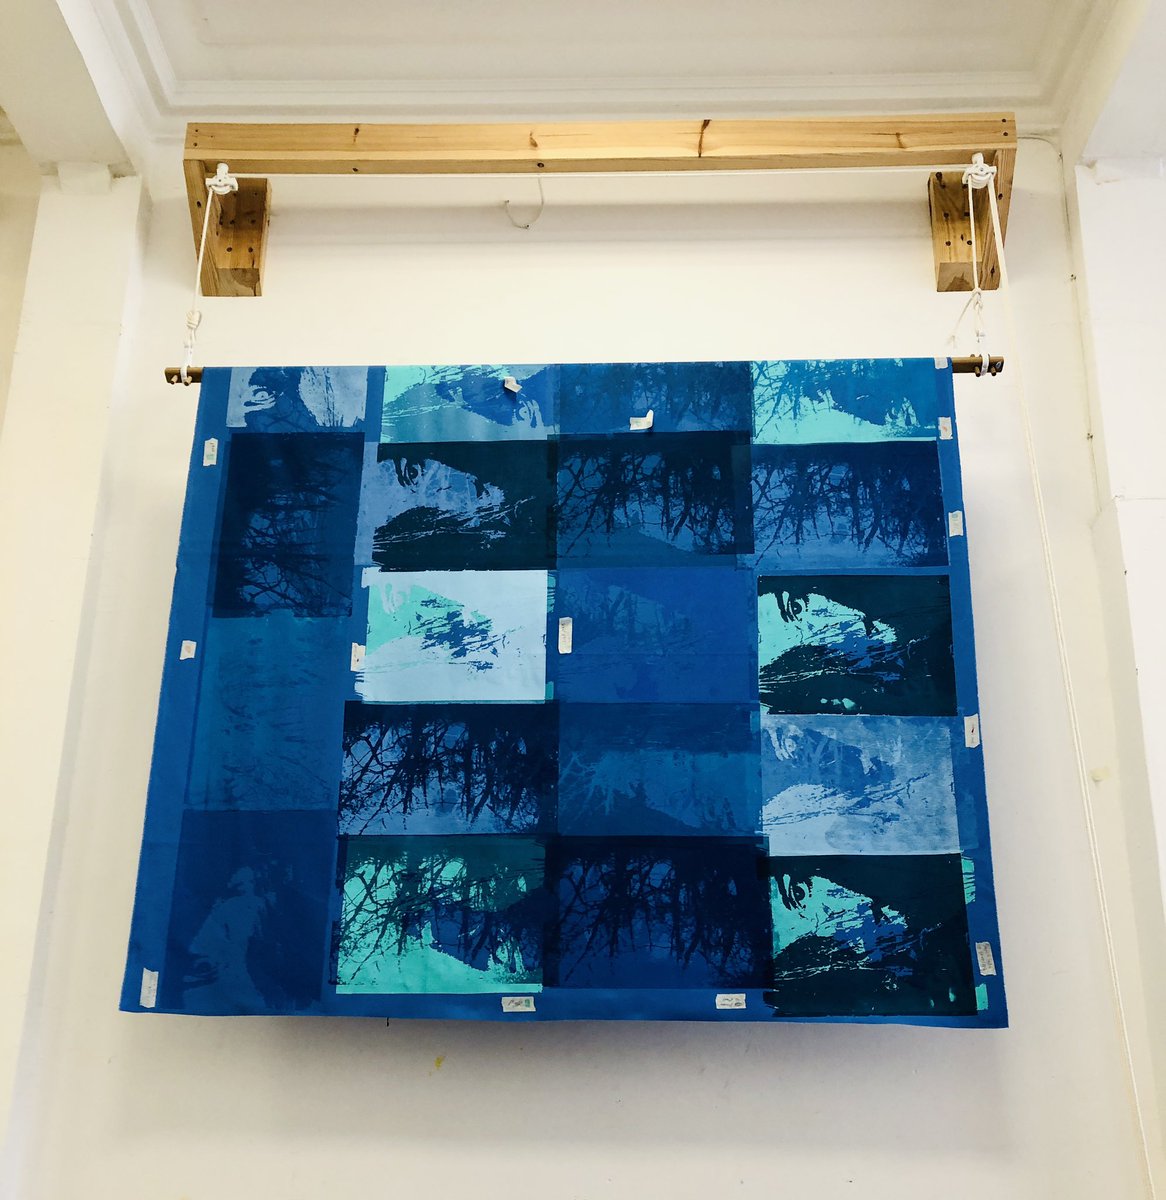 A test piece made in Glasgow @printclanstudio this piece, explores a period when all I saw was blue, I’ve layered portraits & landscape distorting the image further. Once dry this piece will be tactile #hapticart #disabilityart #testingartideas